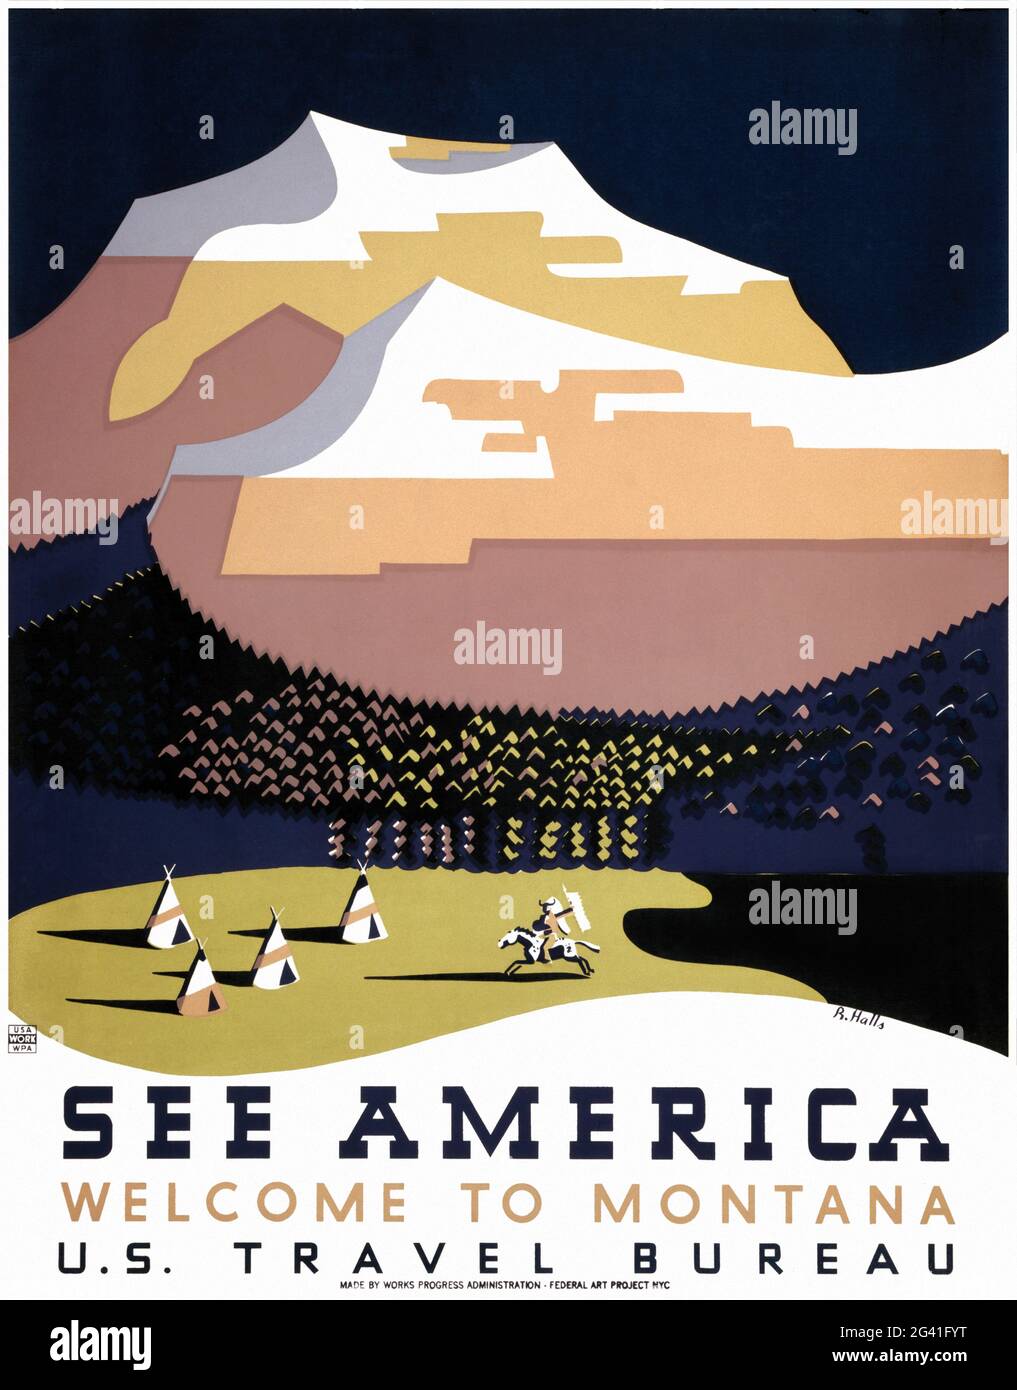 See America. Welcome to Montana by Richard Halls (1906-1976). Restored vintage poster published between 1936 and 1938 in the USA. Stock Photo